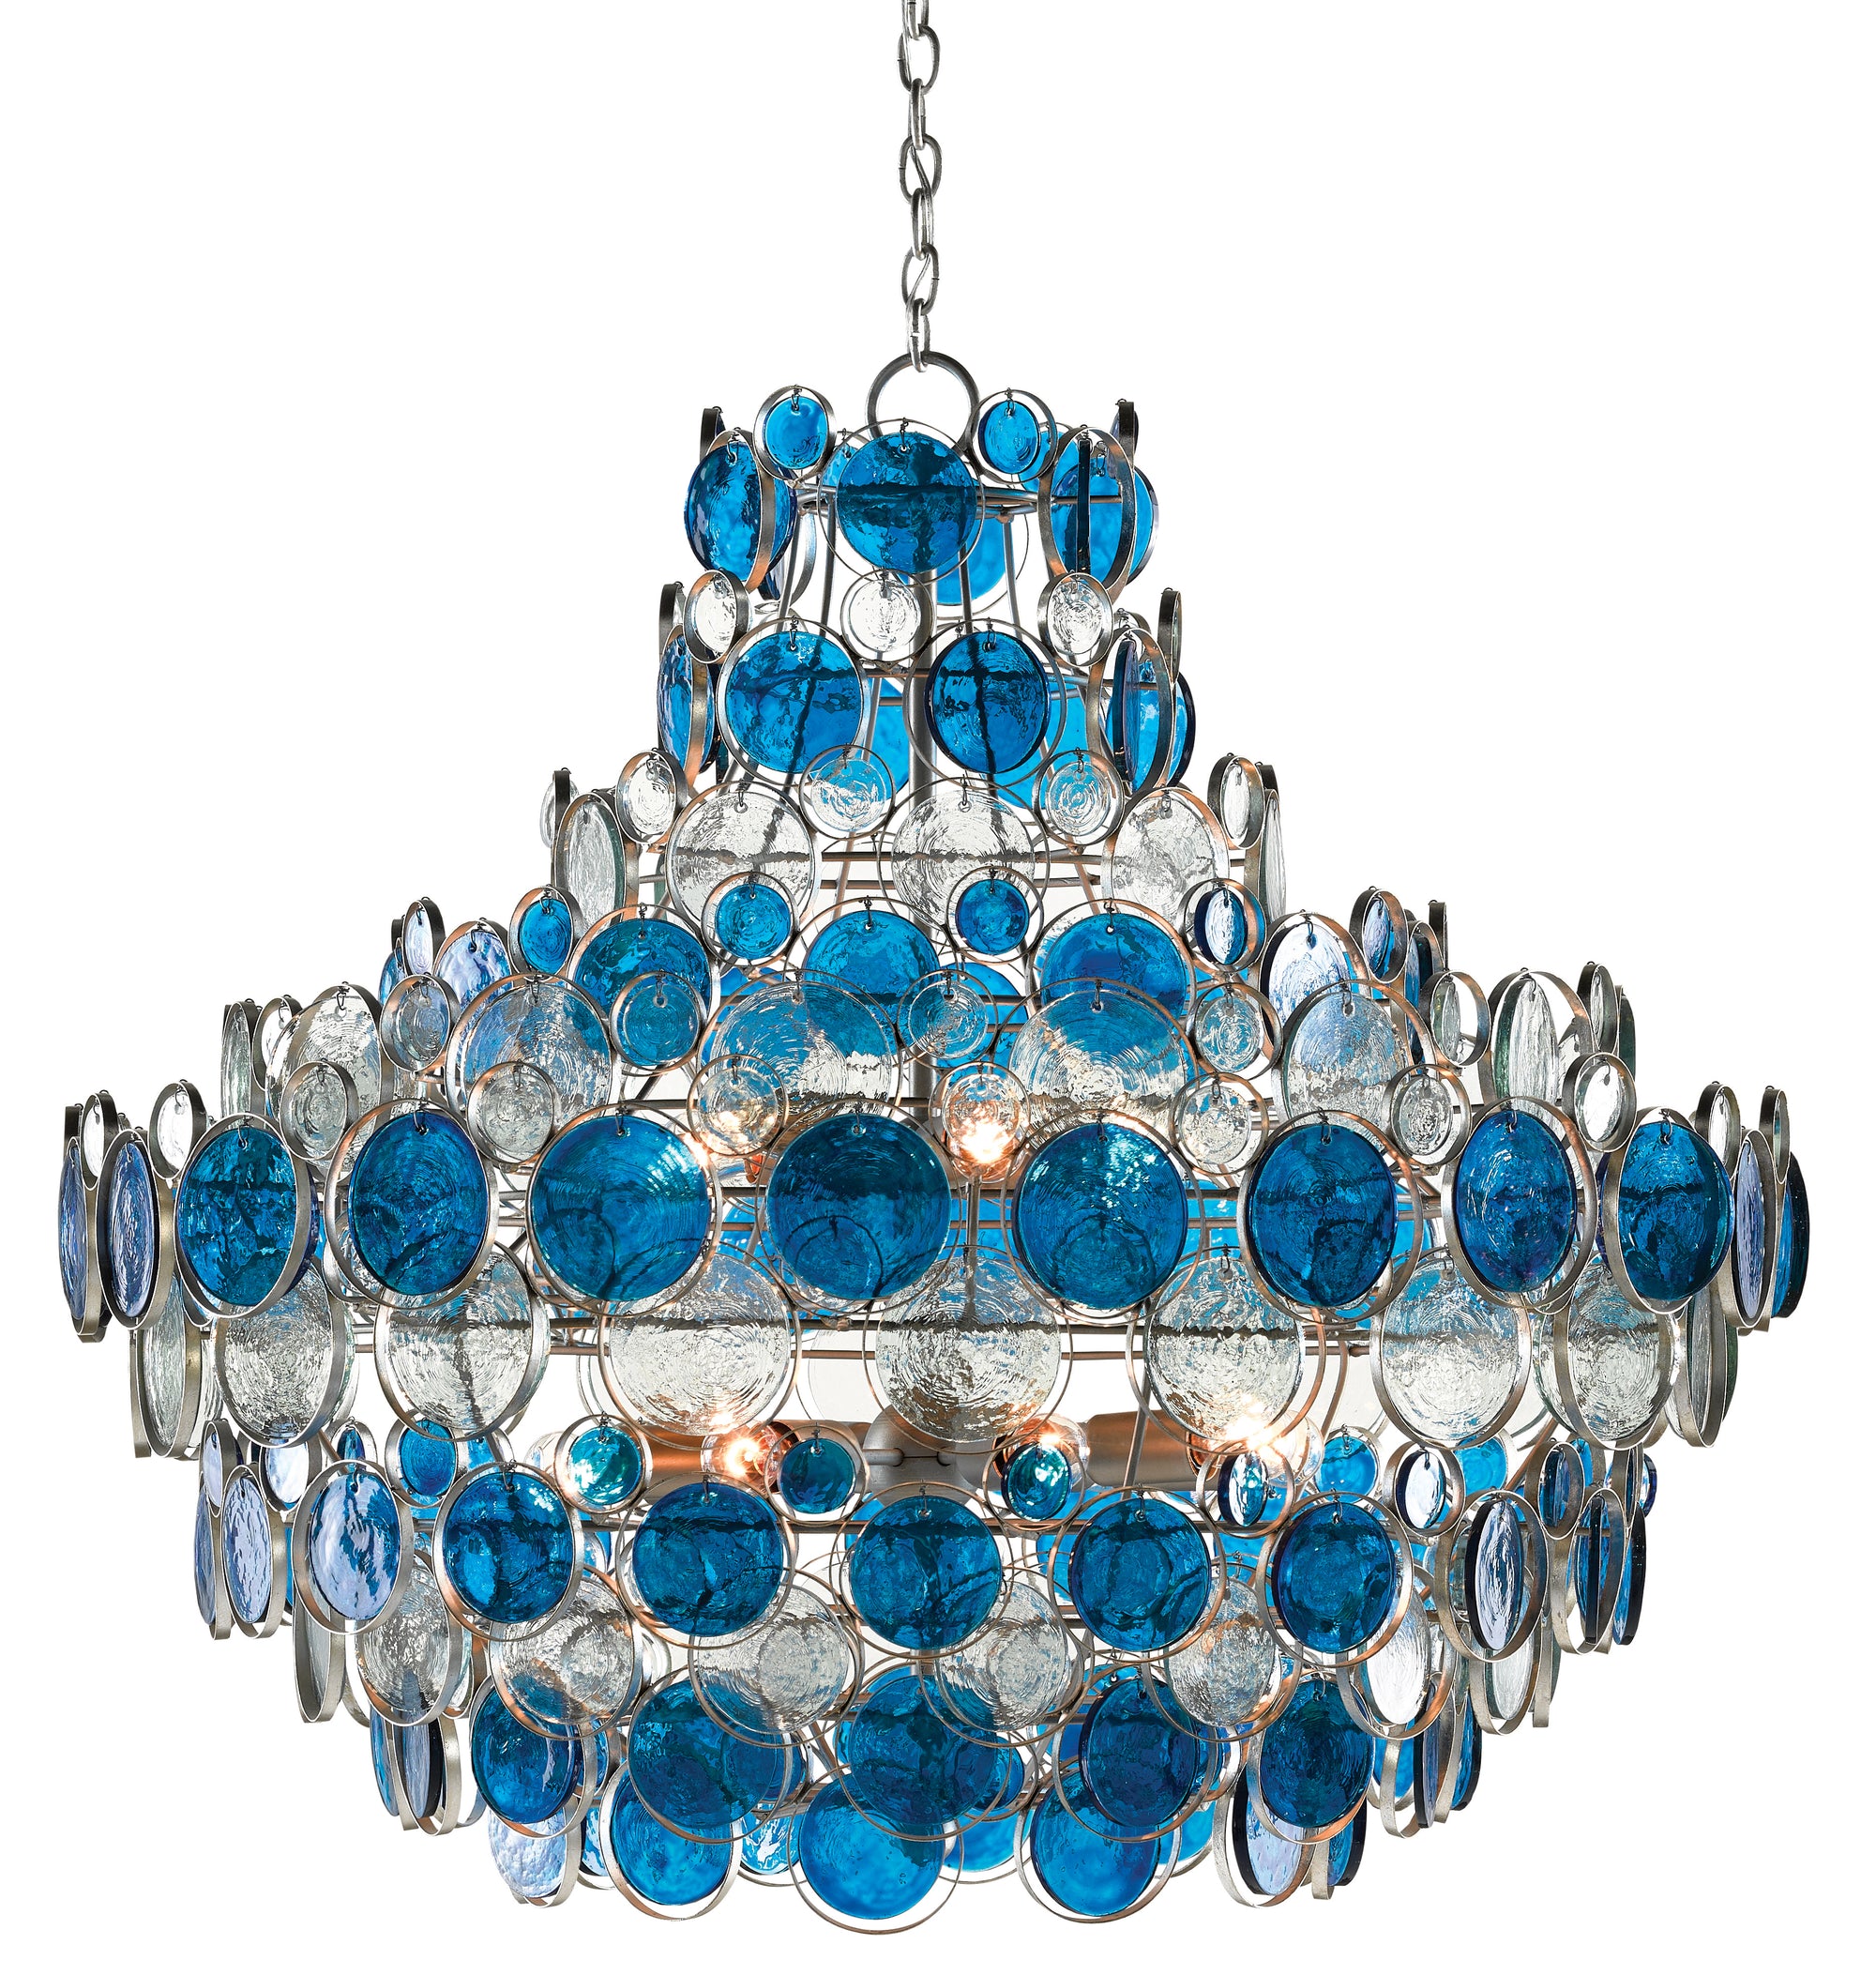 Currey and Company Galahad Blue Chandelier, Recycled blue glass large chandelier 